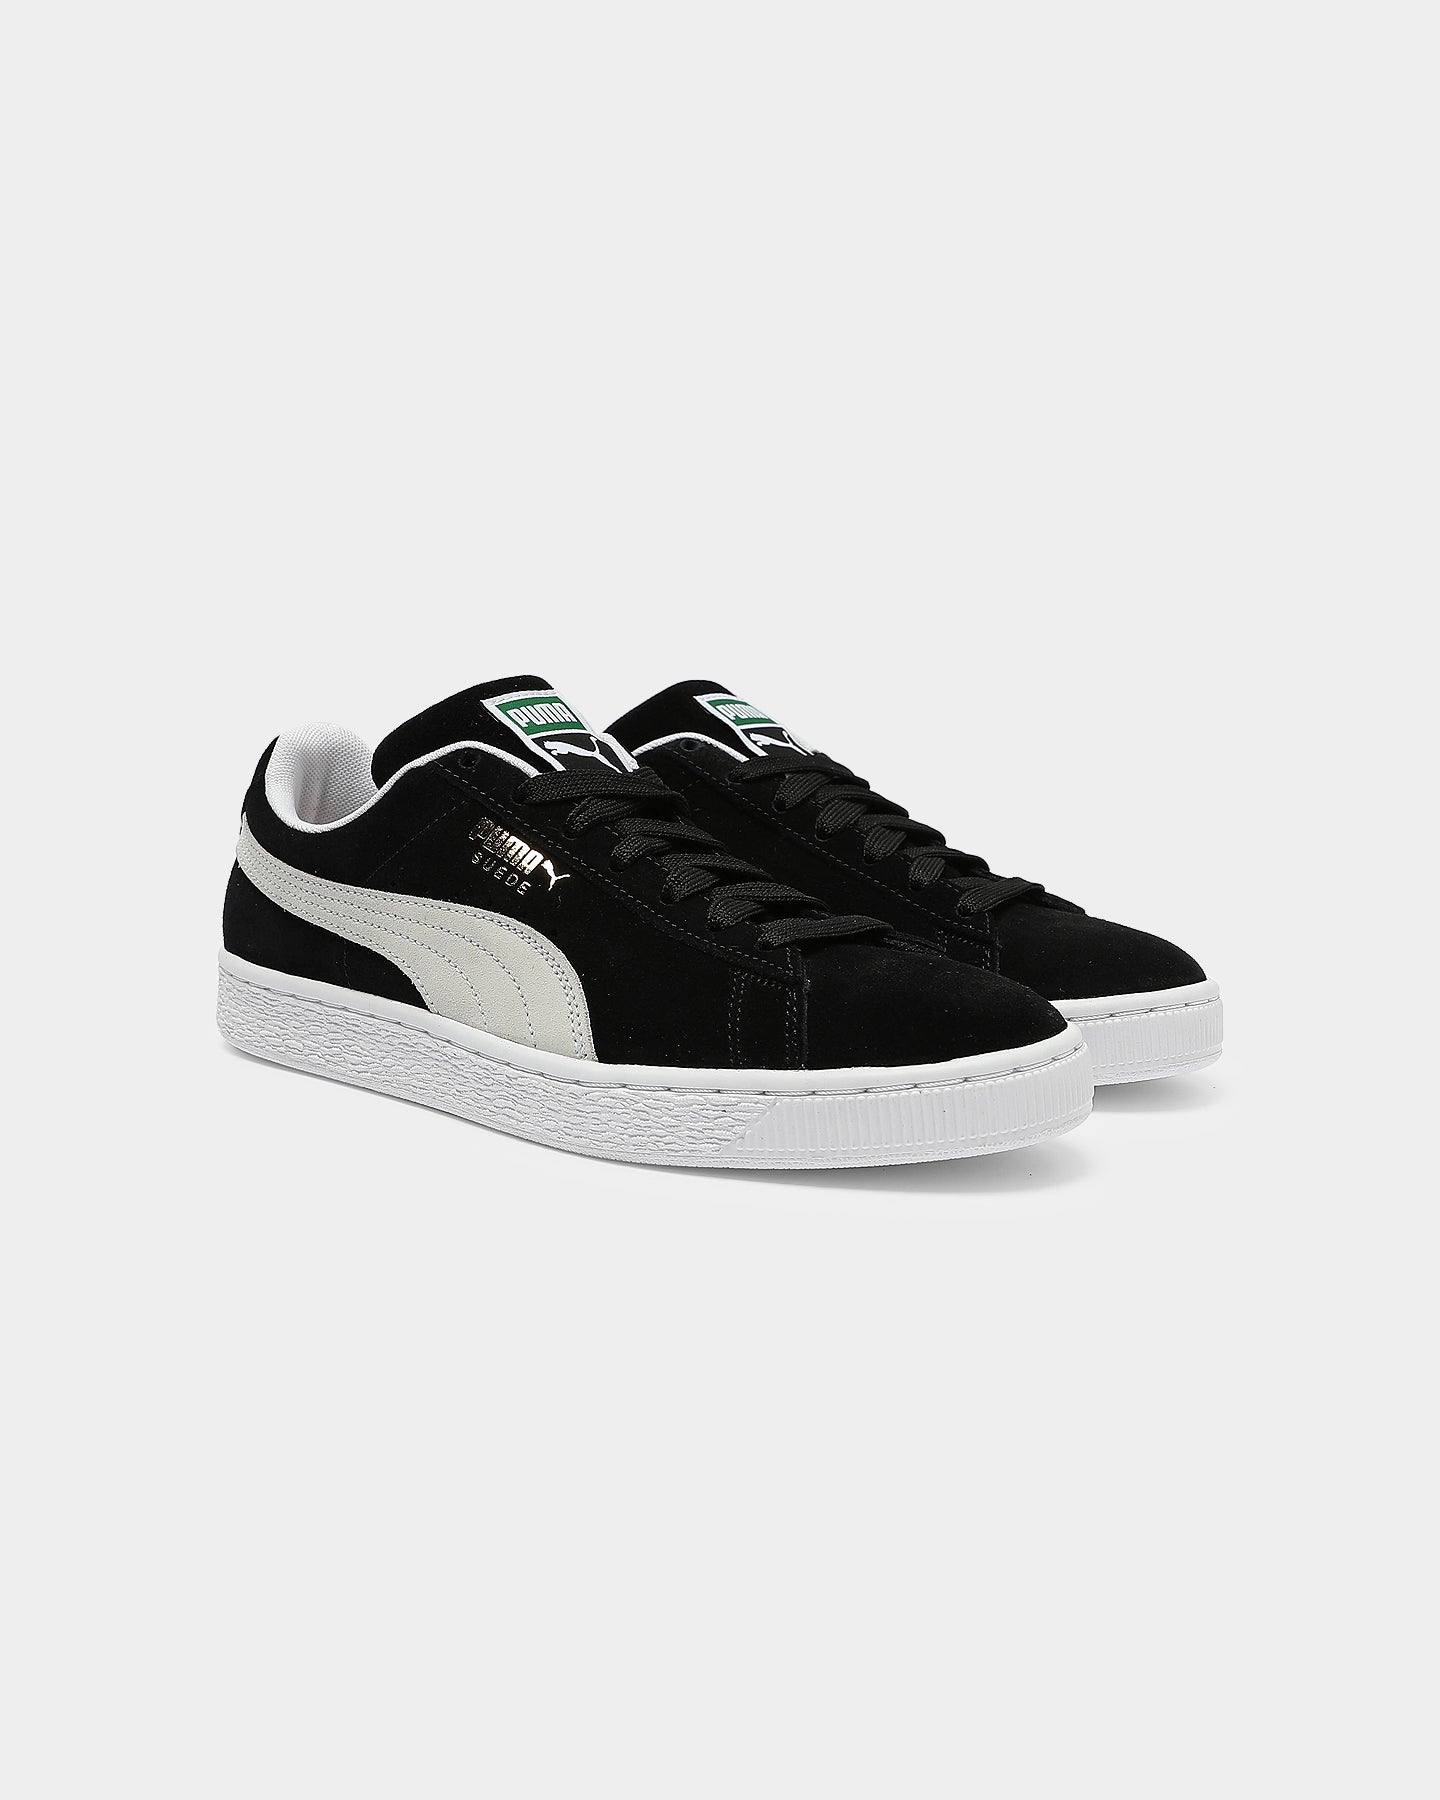 puma suede shoes black and white